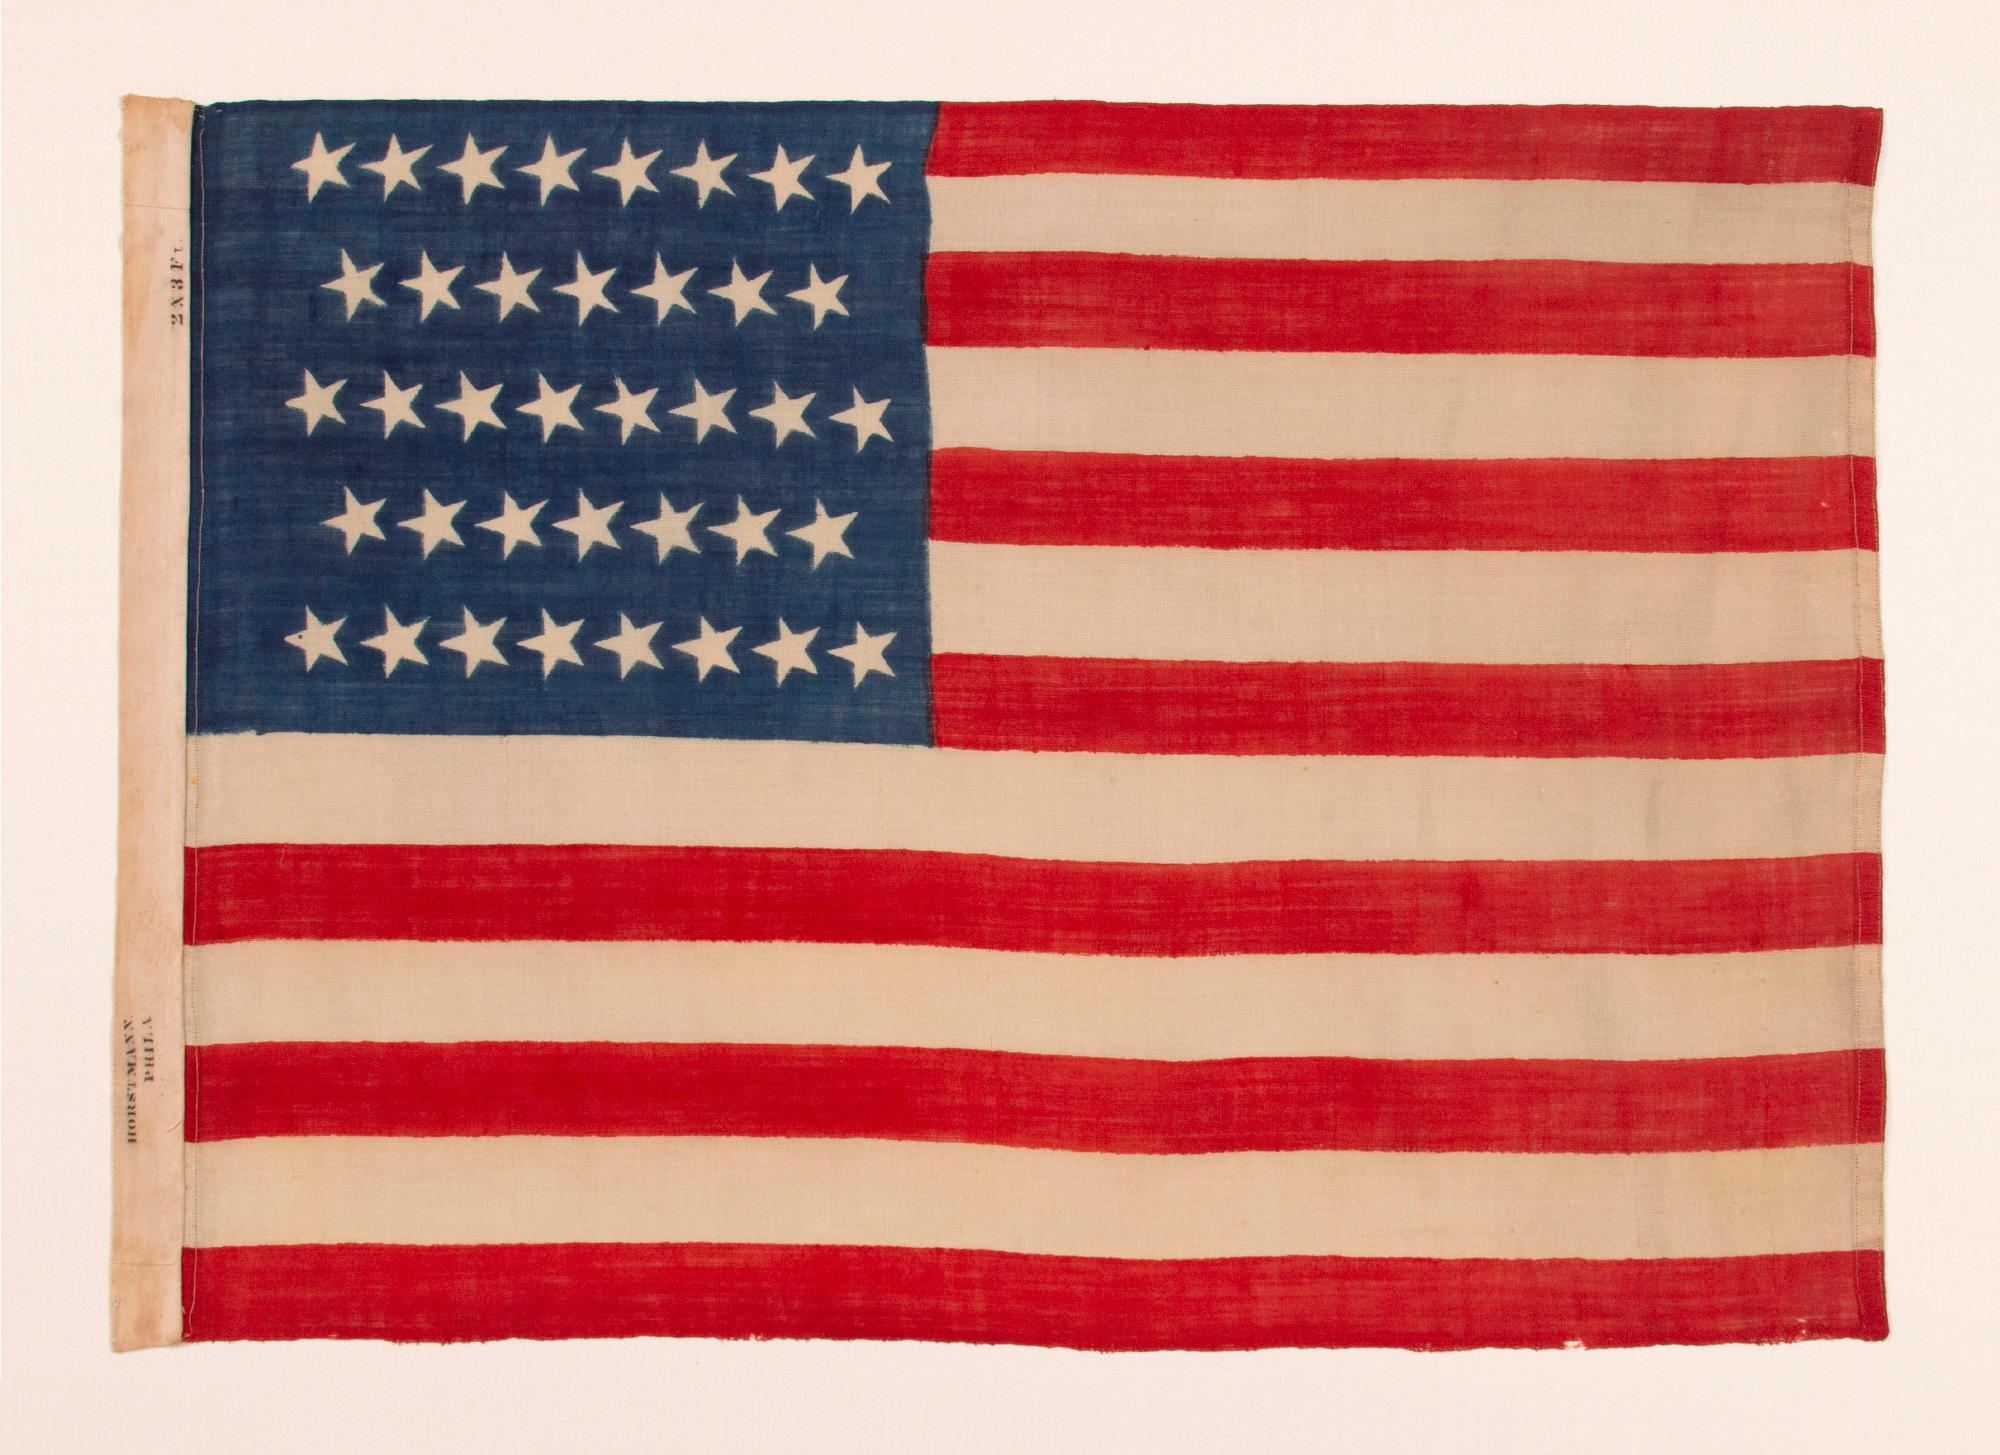 Cotton 38 Star Antique American Flag by Horstman Brothers, Colorado Statehood, ca 1876 For Sale